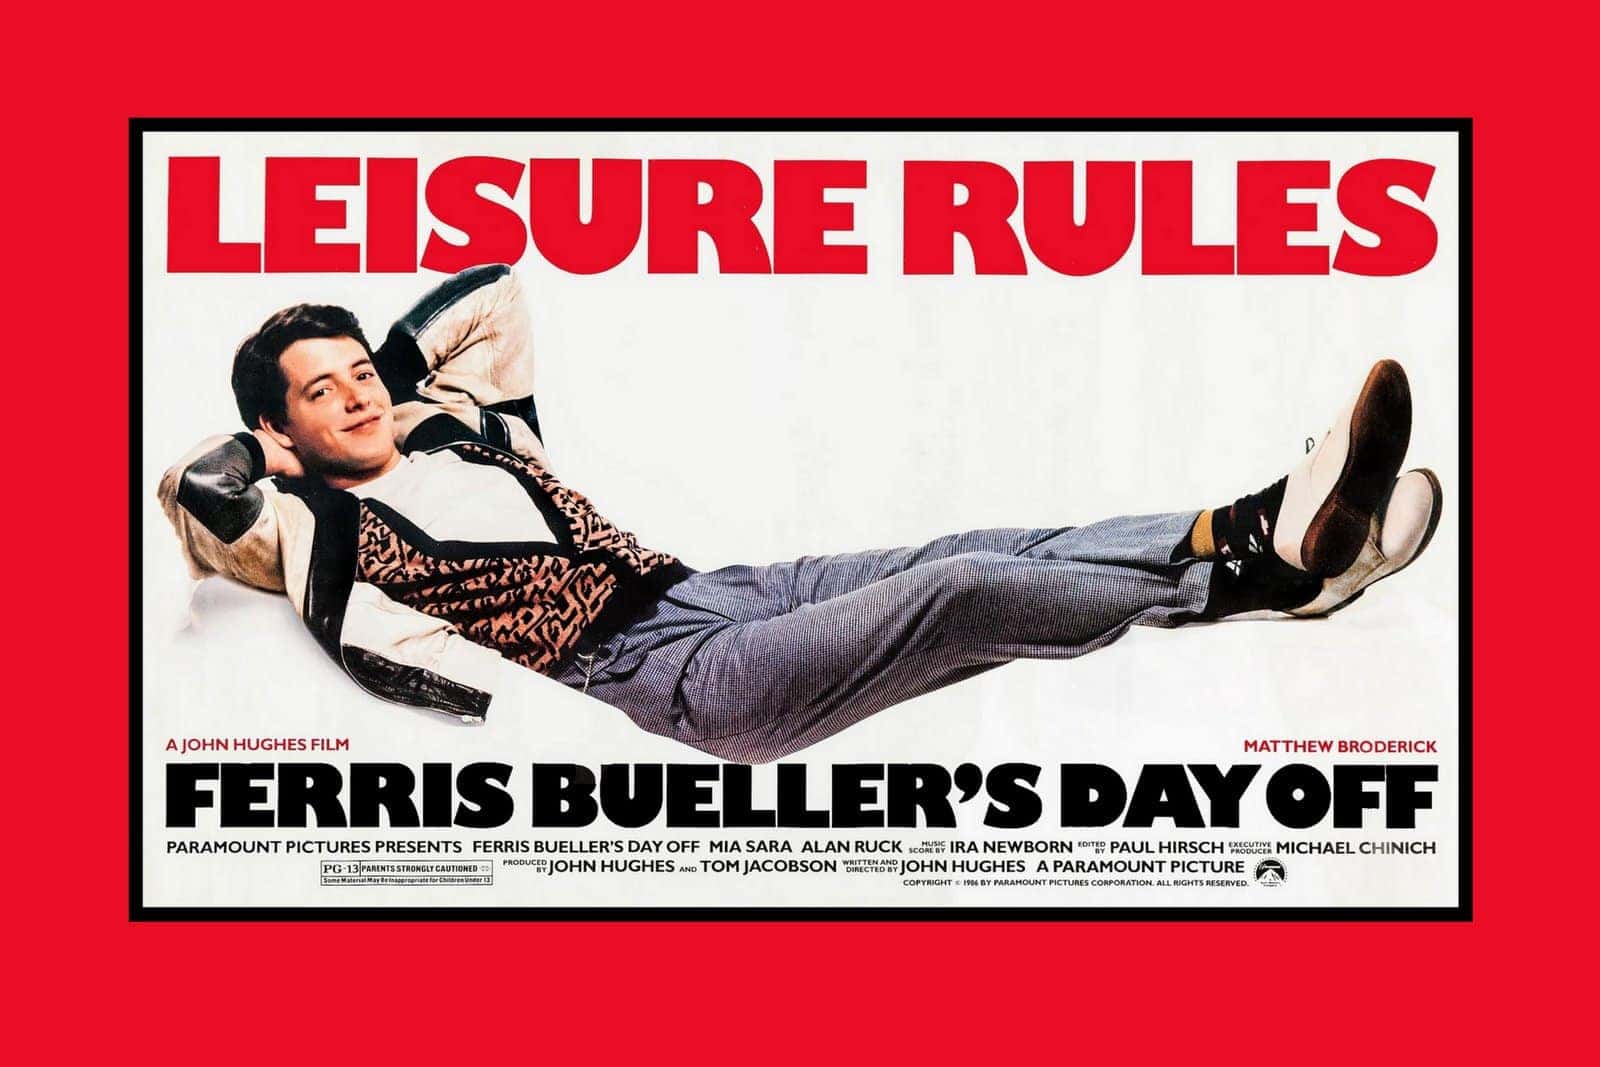 Credit: https://facts.net/movie/36-facts-about-the-movie-ferris-buellers-day-off/